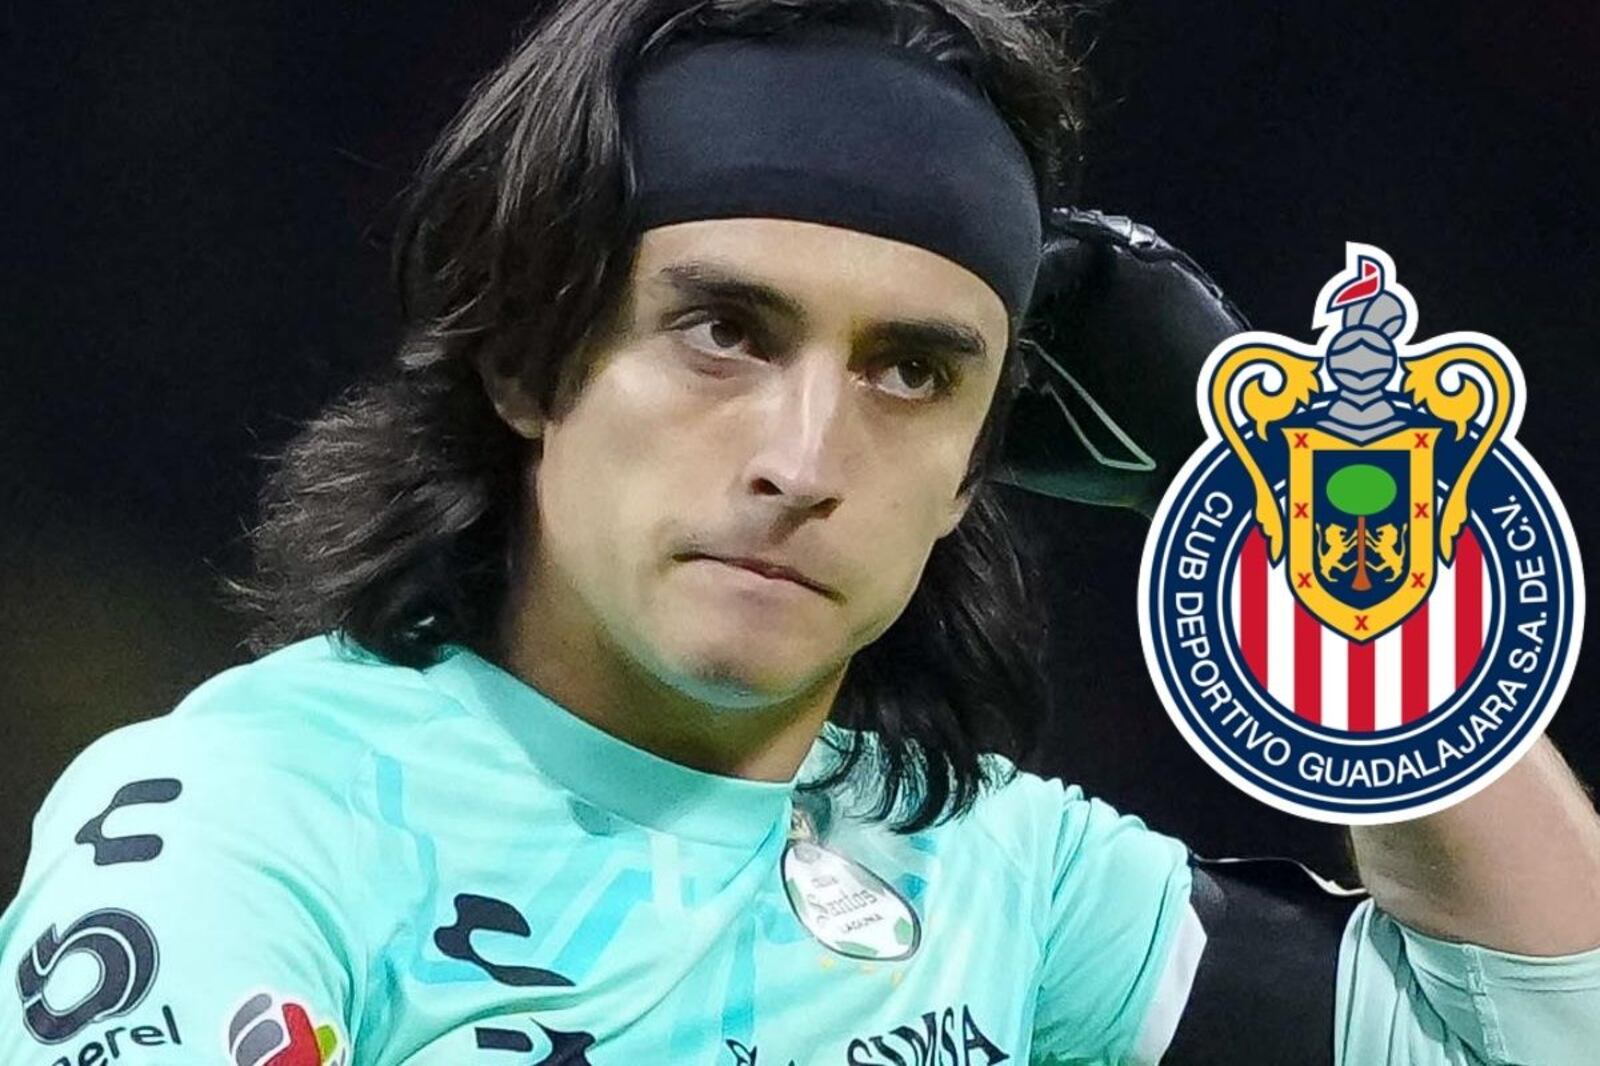 While Alexis Vega earns 2 million, what Carlos Acevedo would earn in Chivas